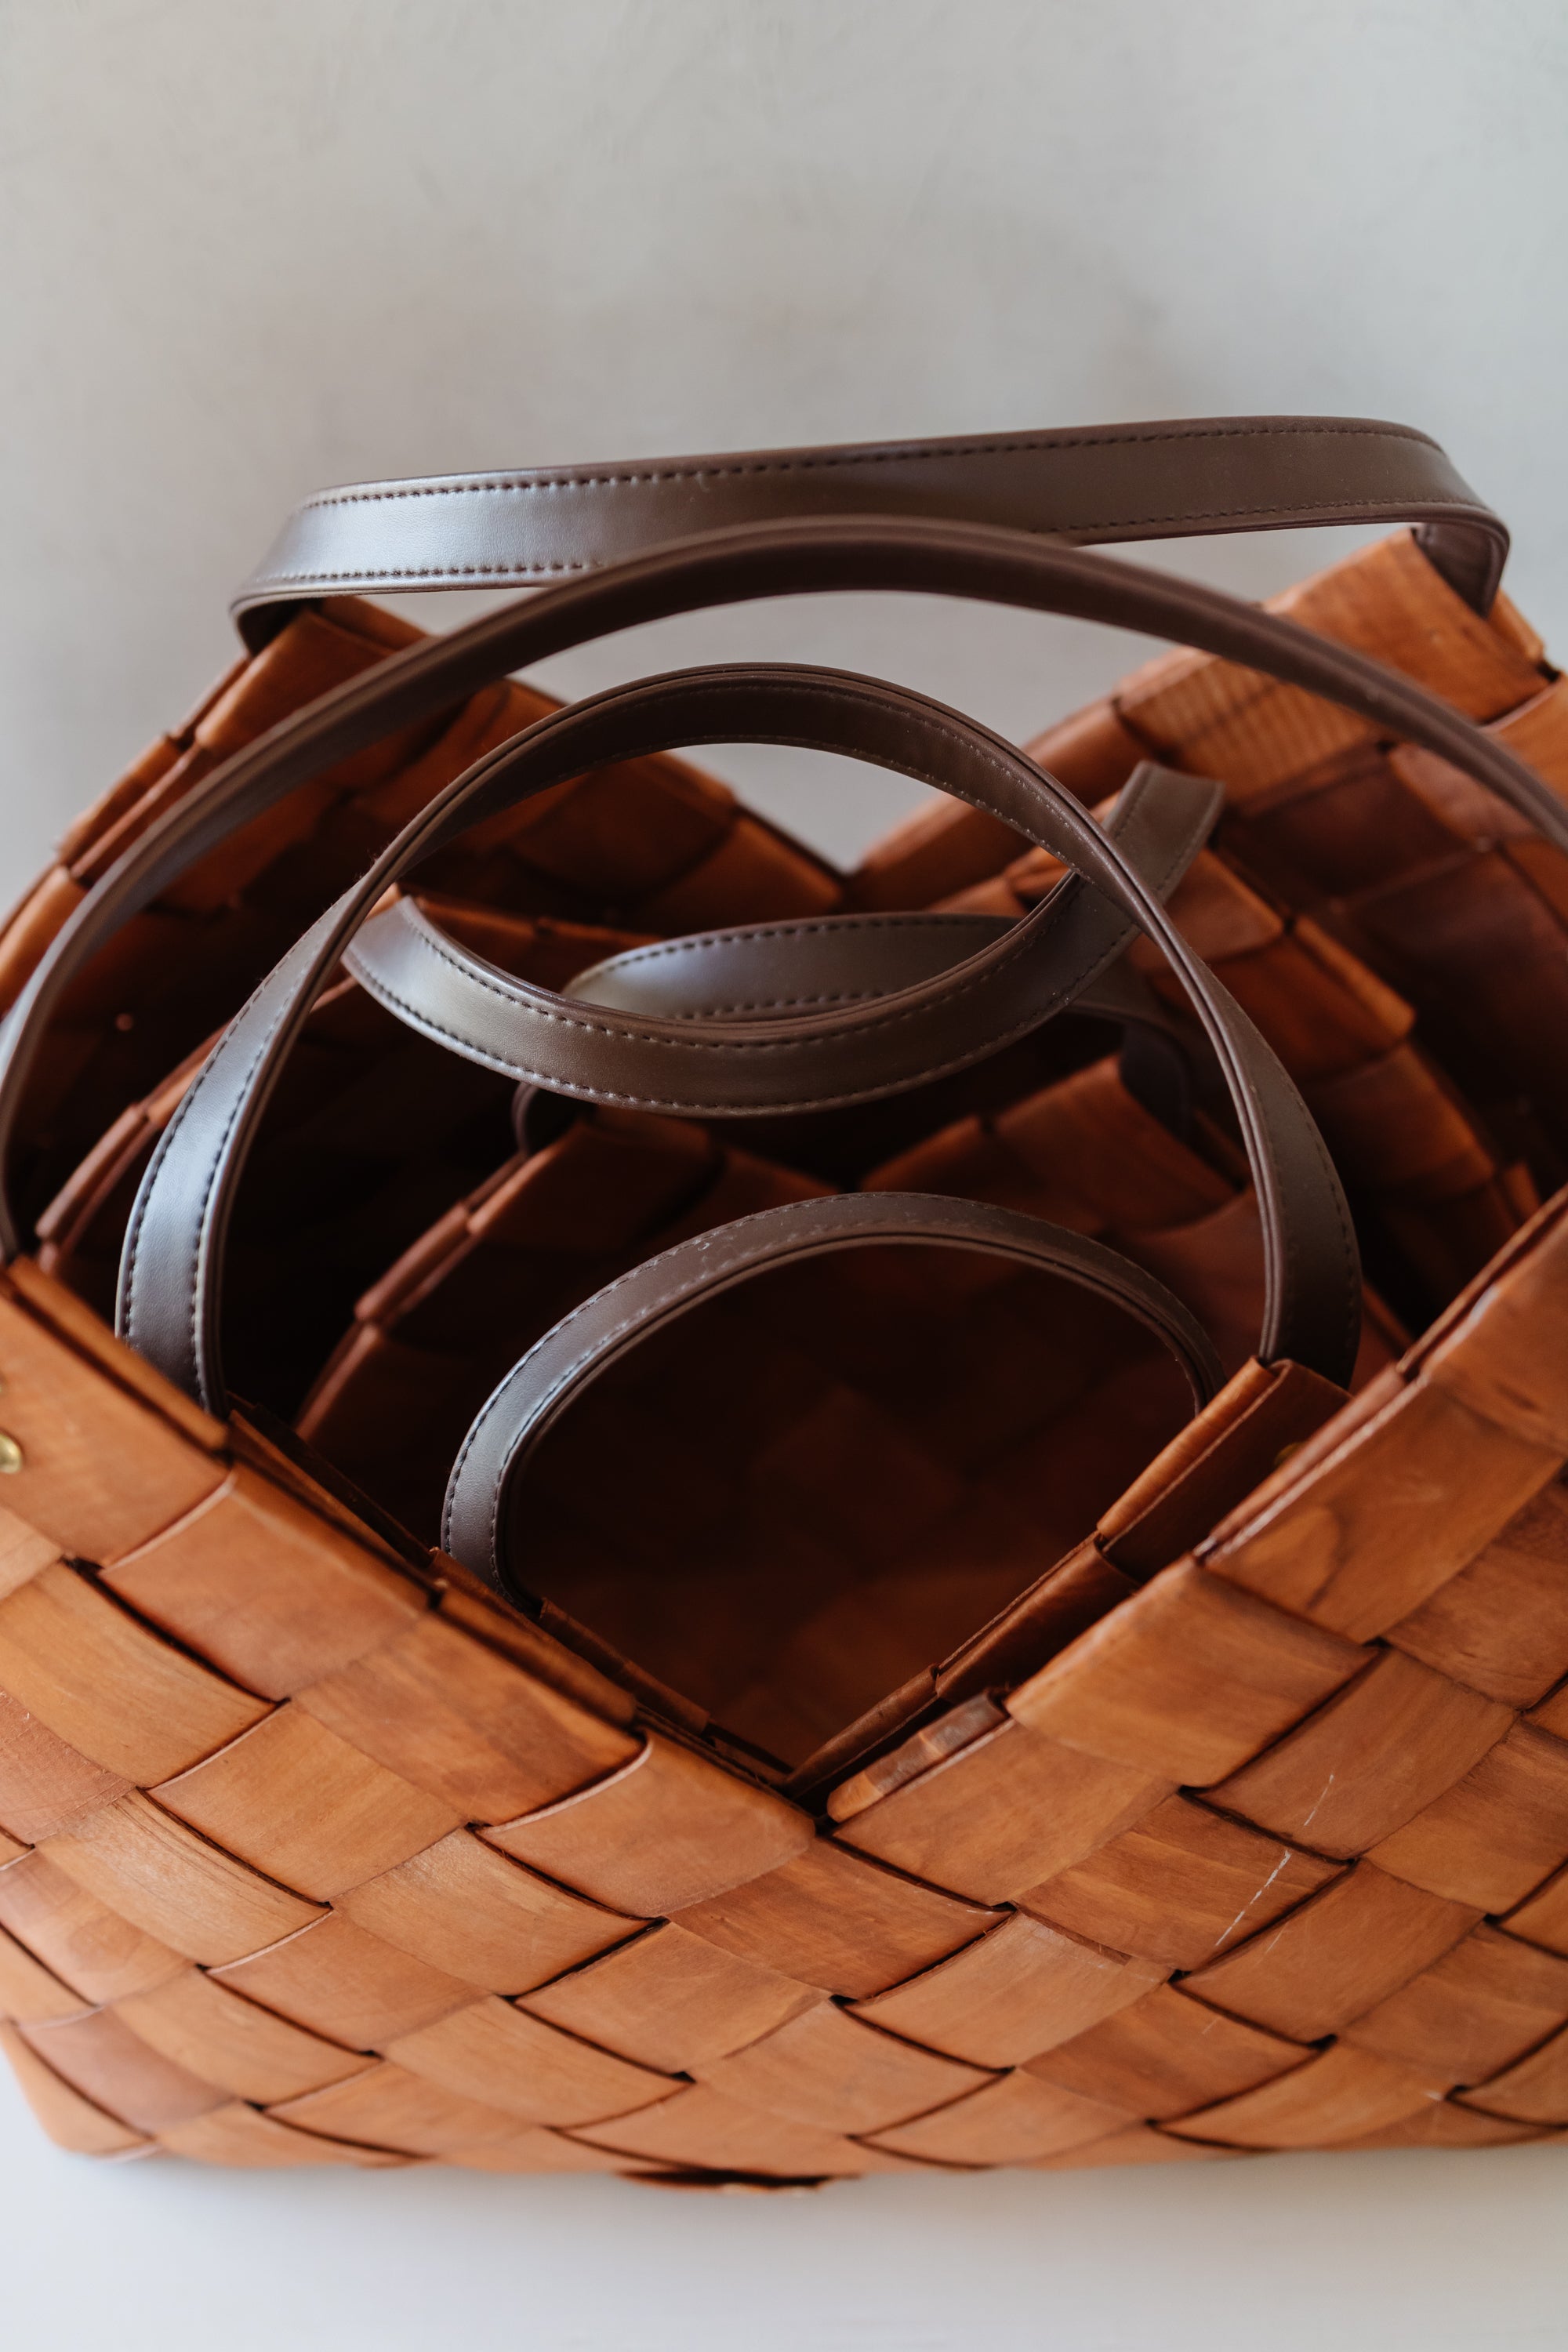 Leather Woven Basket - 16 x 8 x 8 - Saddle | Home Gifts